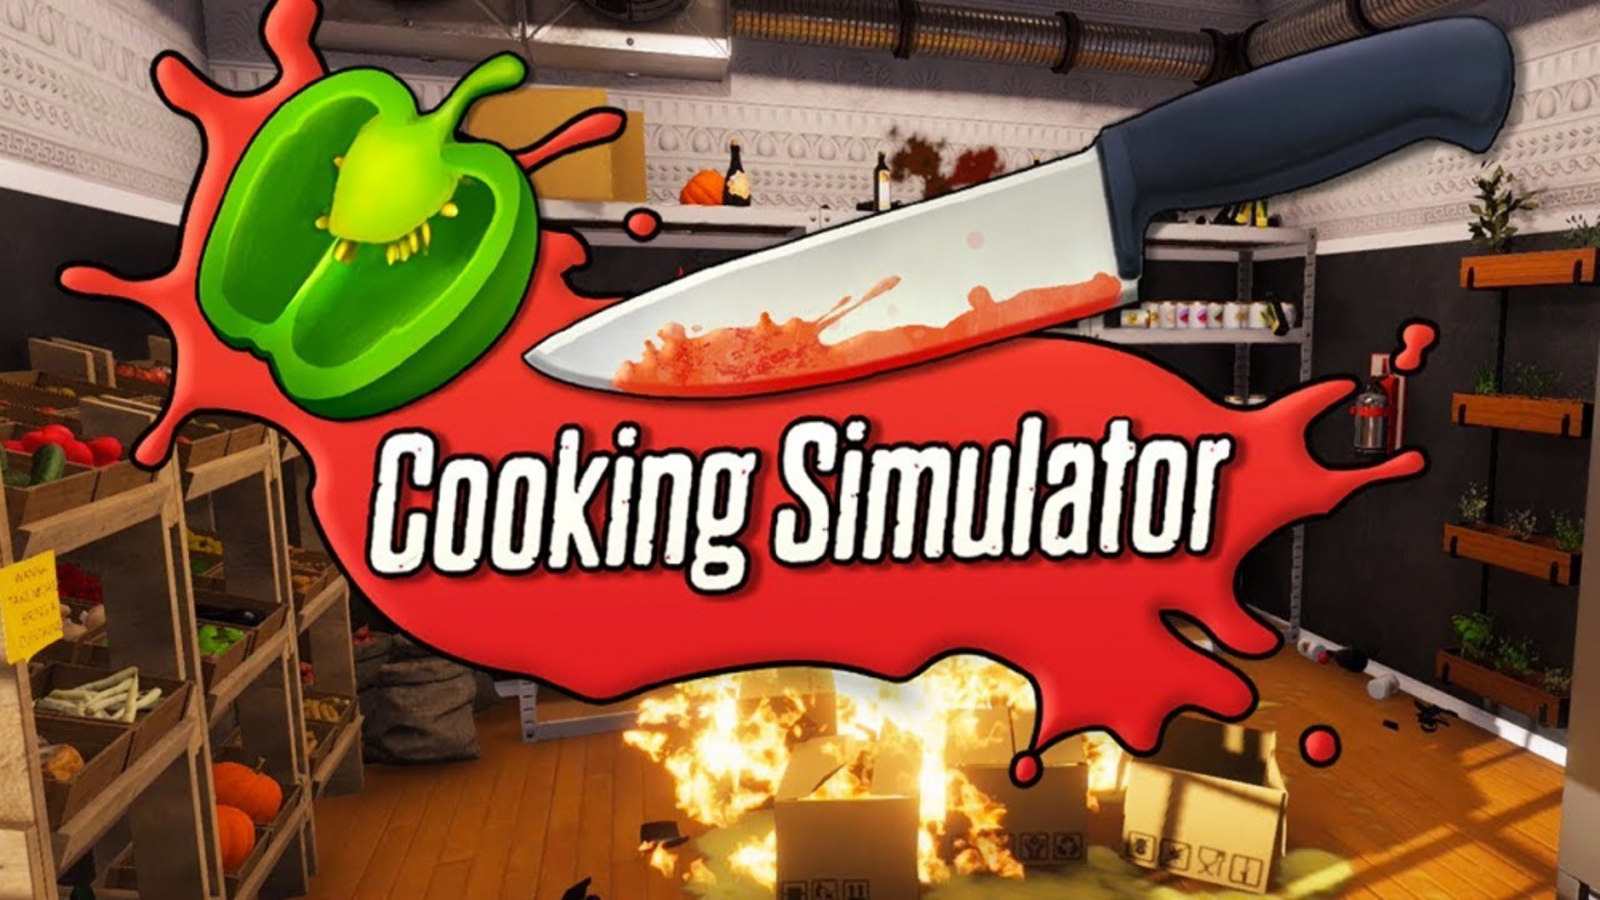 Buy Cooking Simulator: Cooking with Food Network DLC - Microsoft Store en-MS